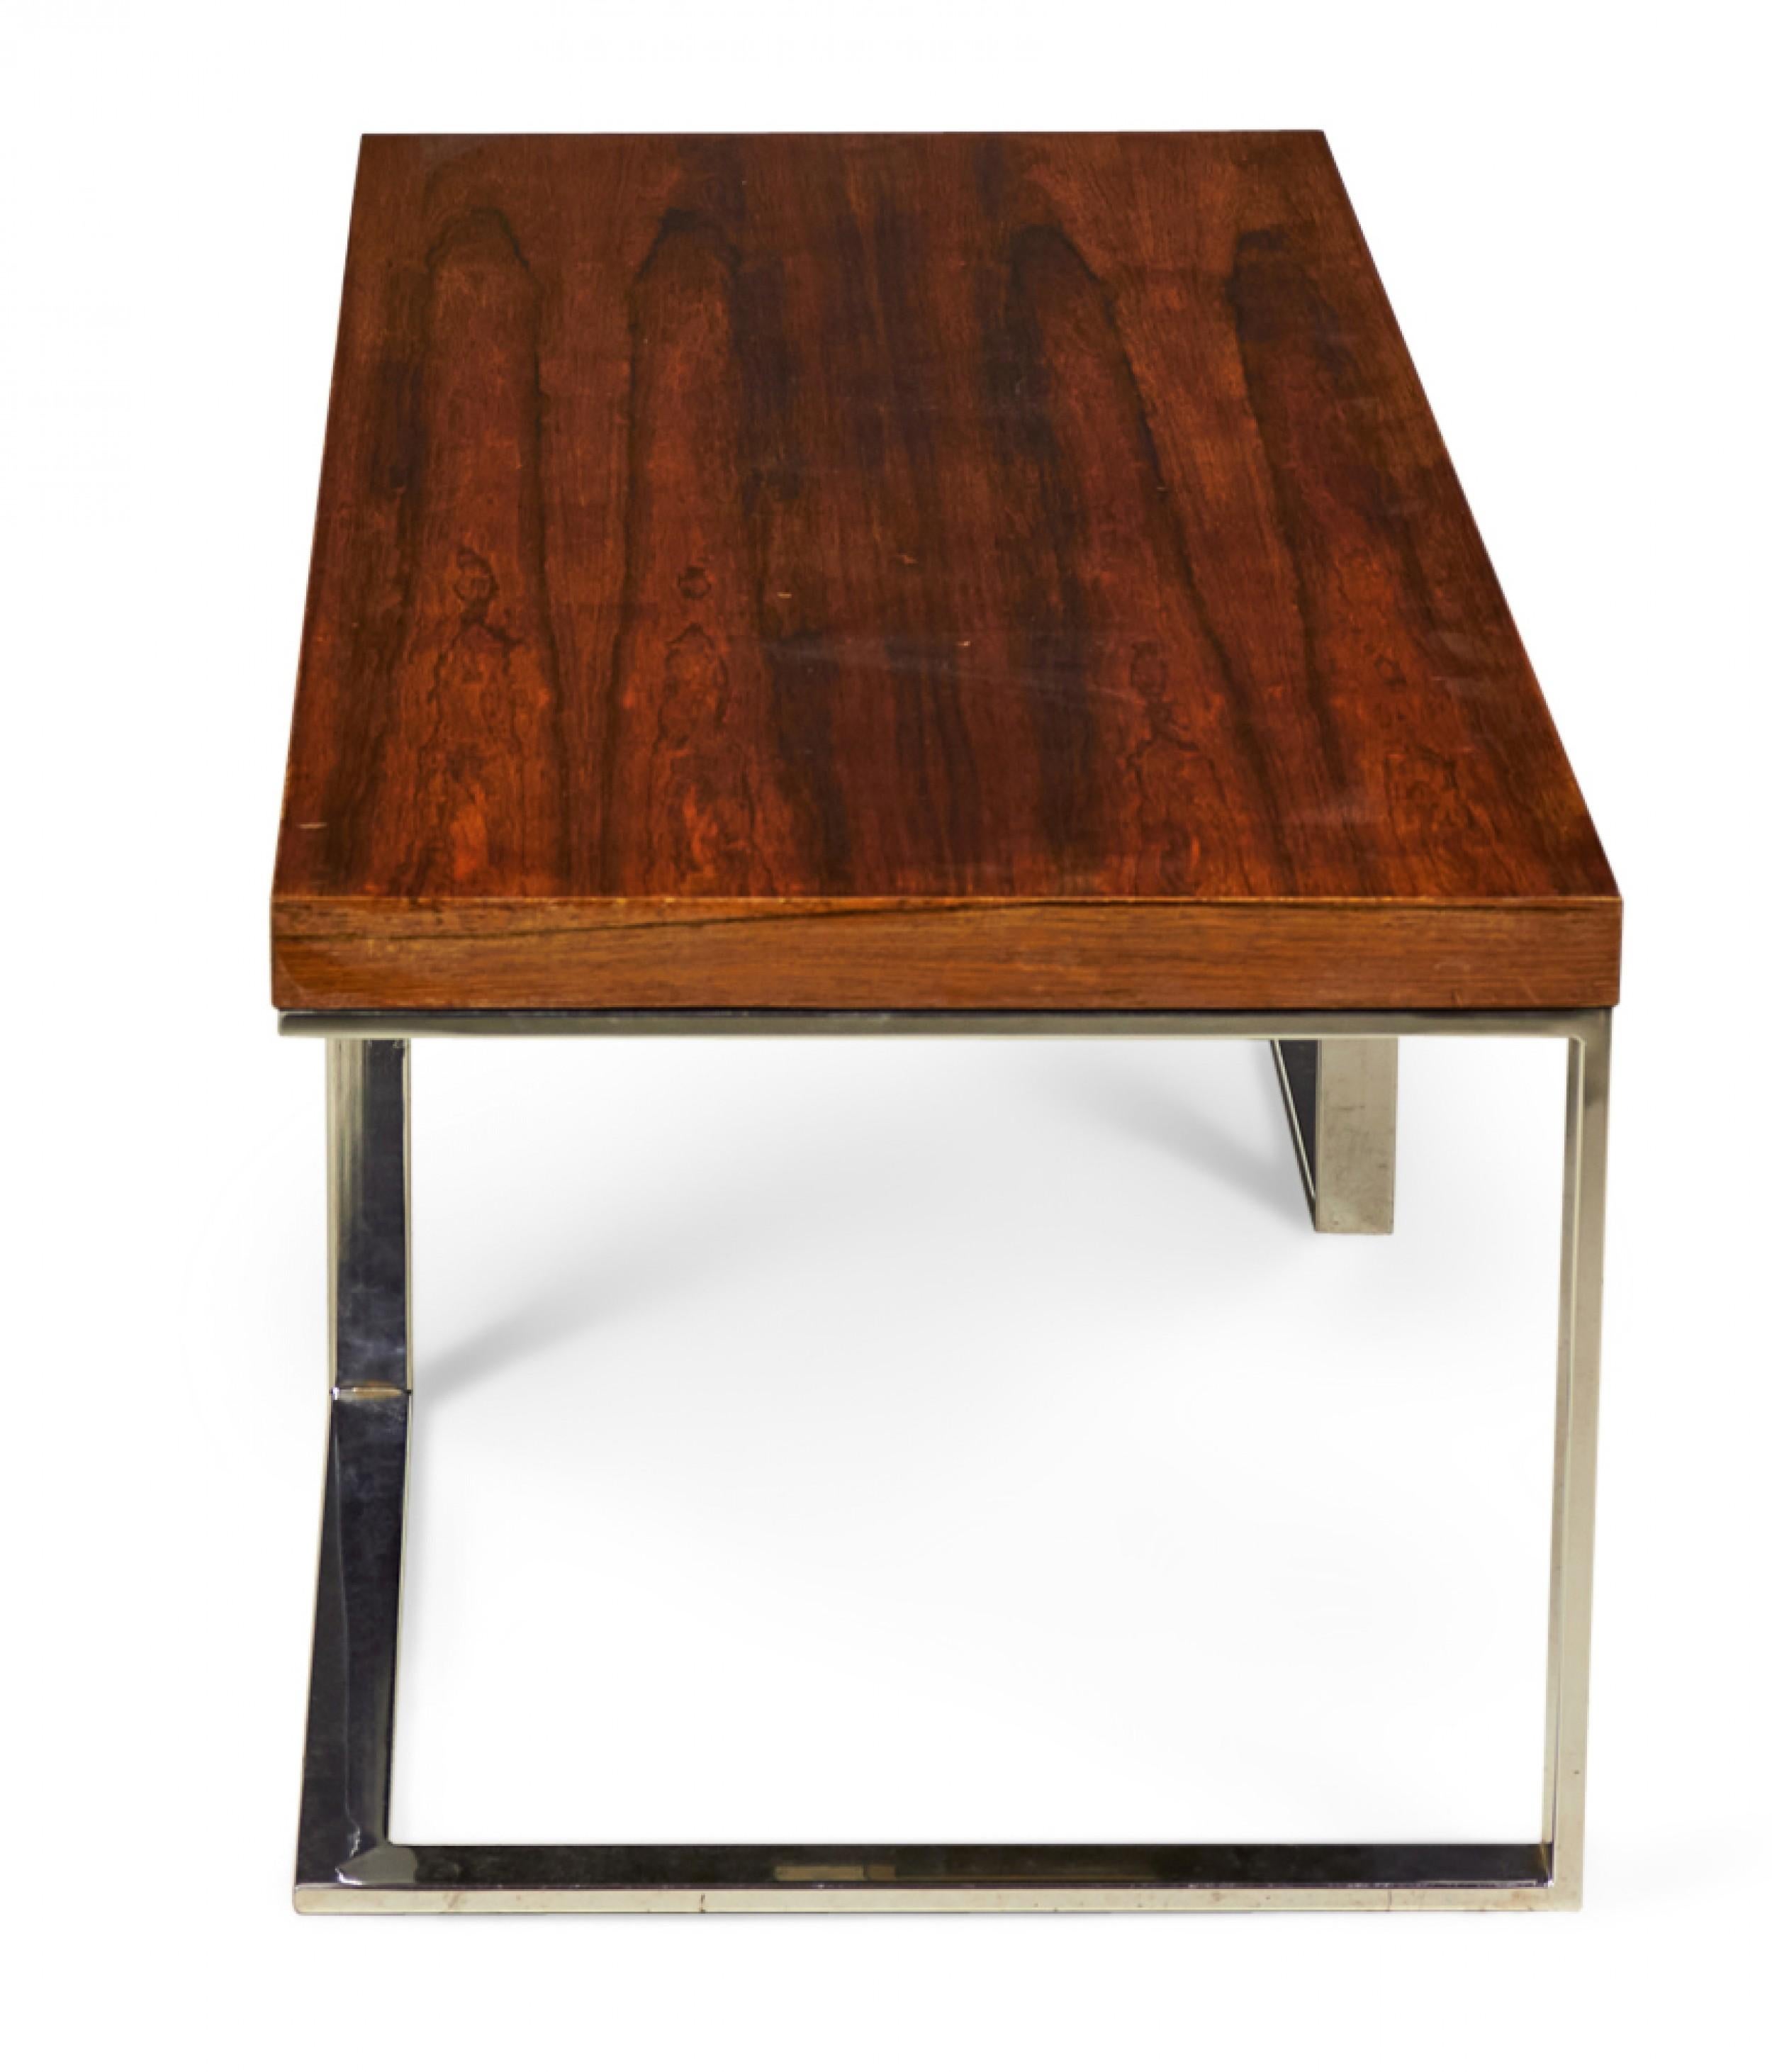 Steel Milo Baughman for Thayer Coggin Rosewood 'Minimalist' Cocktail / Coffee Table For Sale